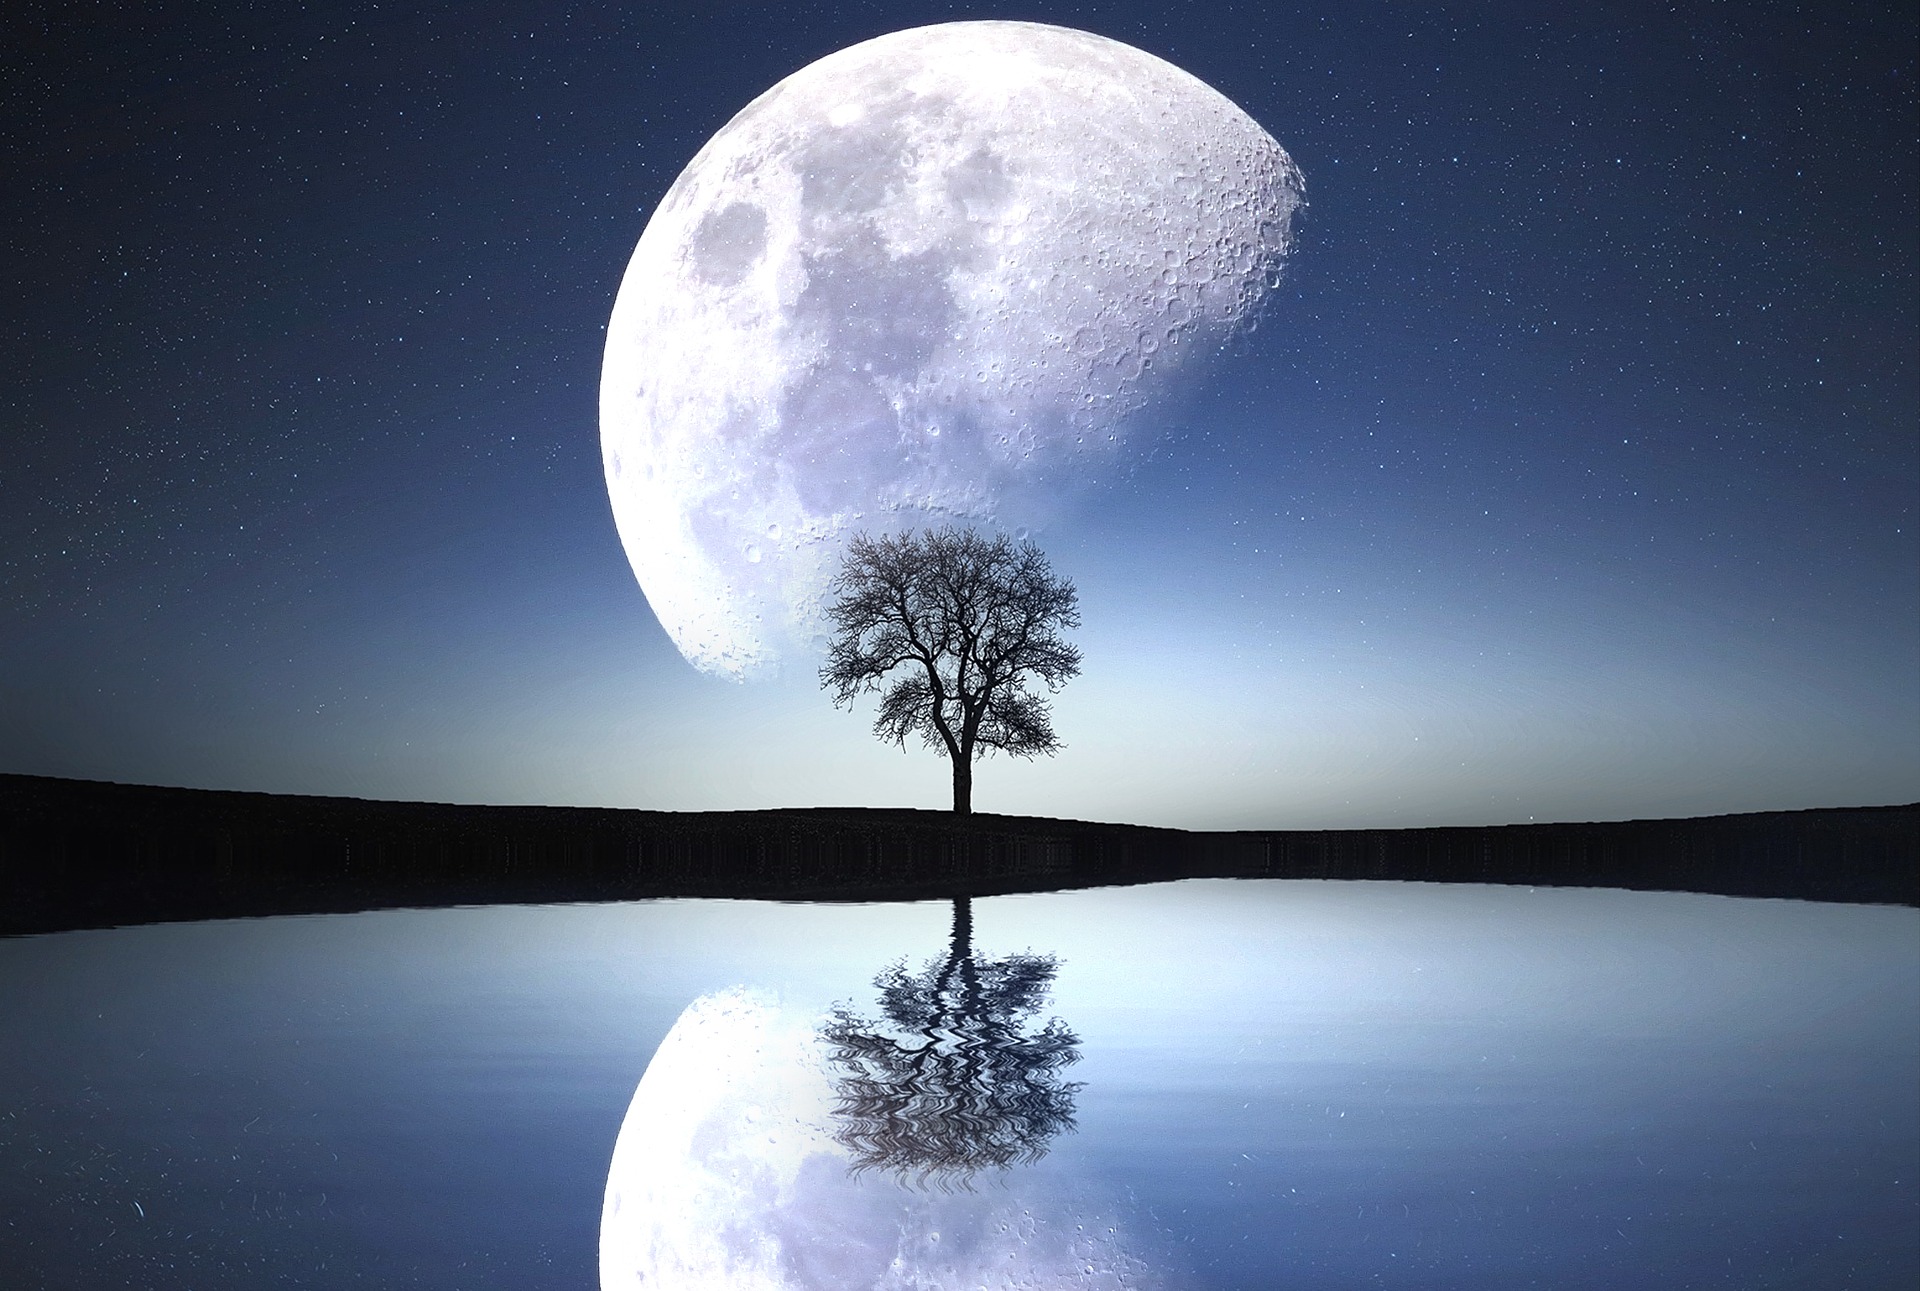 Moon and tree reflecting in water